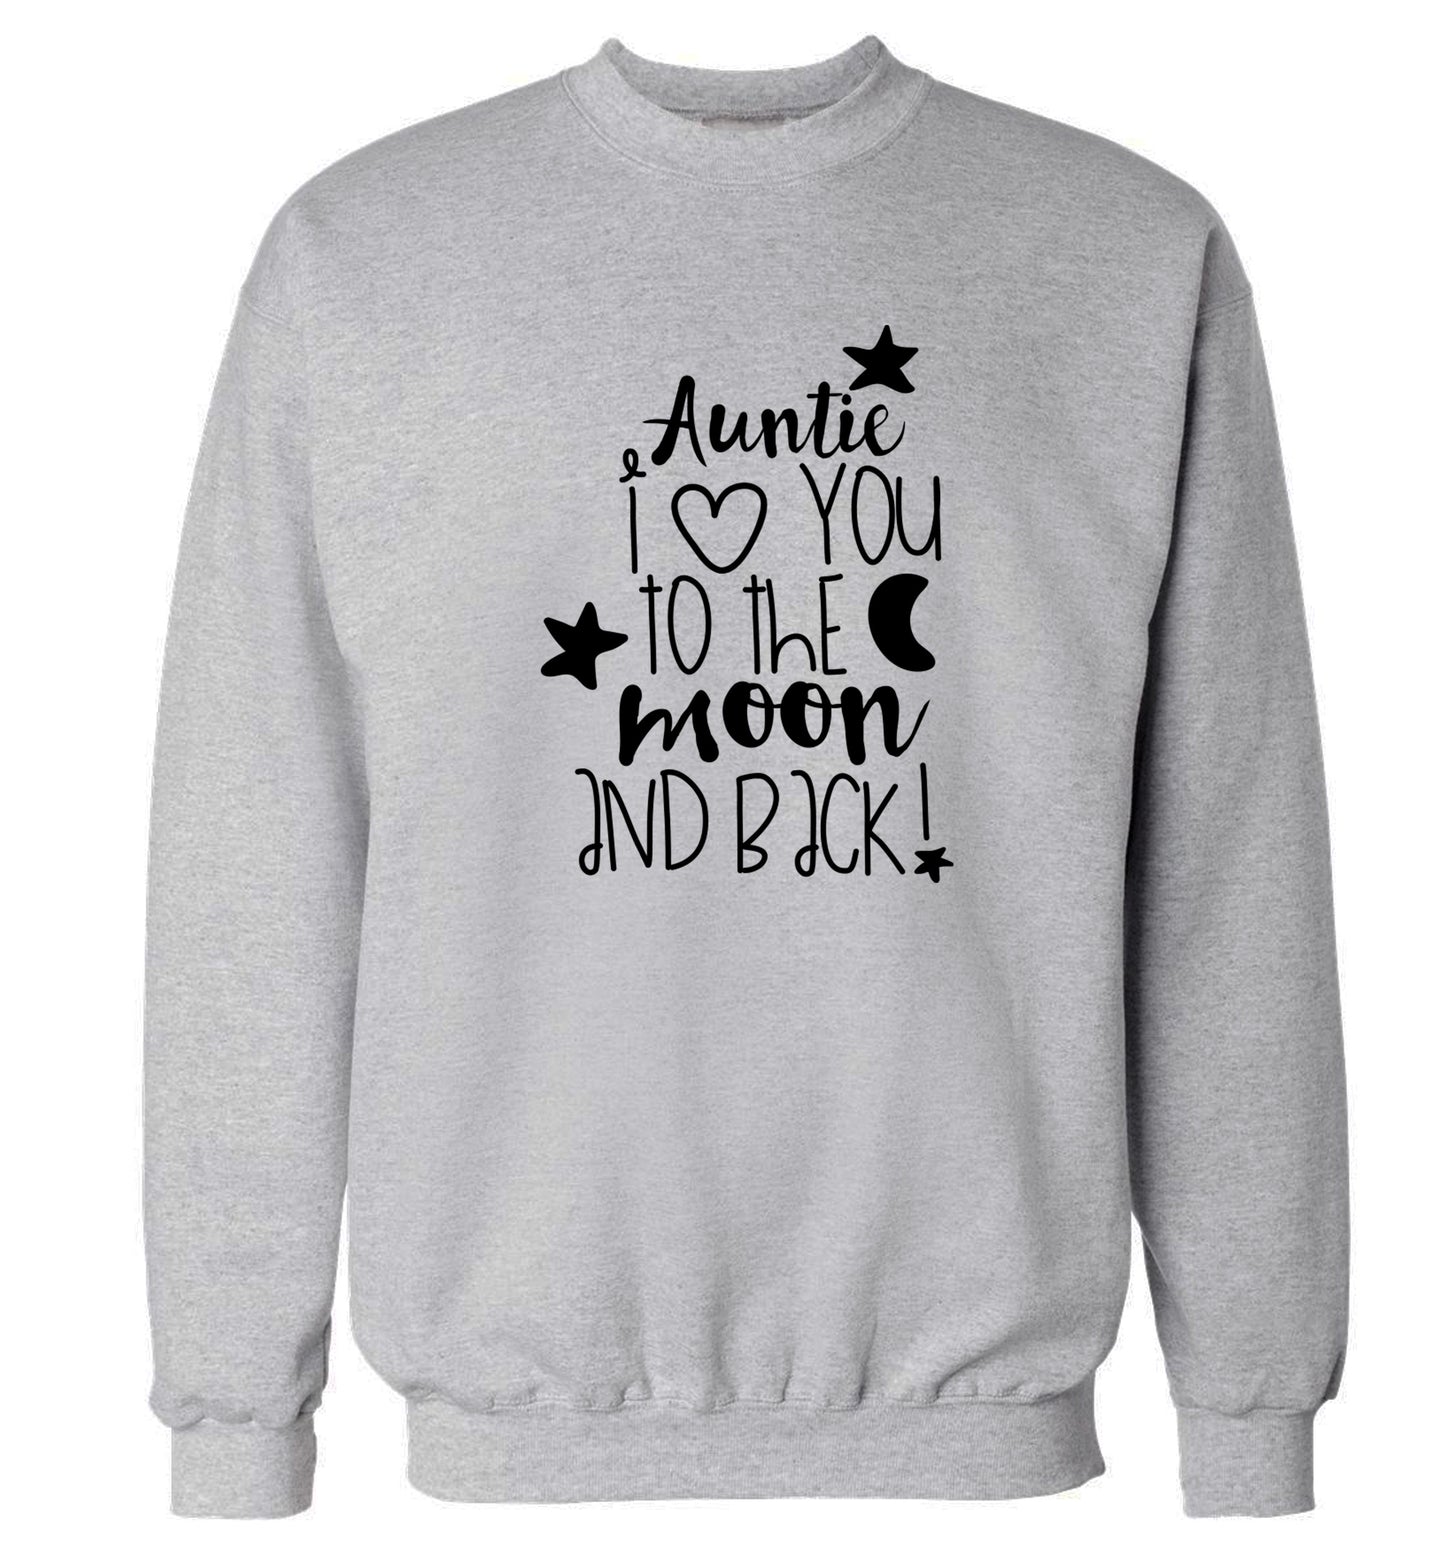 Auntie I love you to the moon and back Adult's unisex grey  sweater 2XL